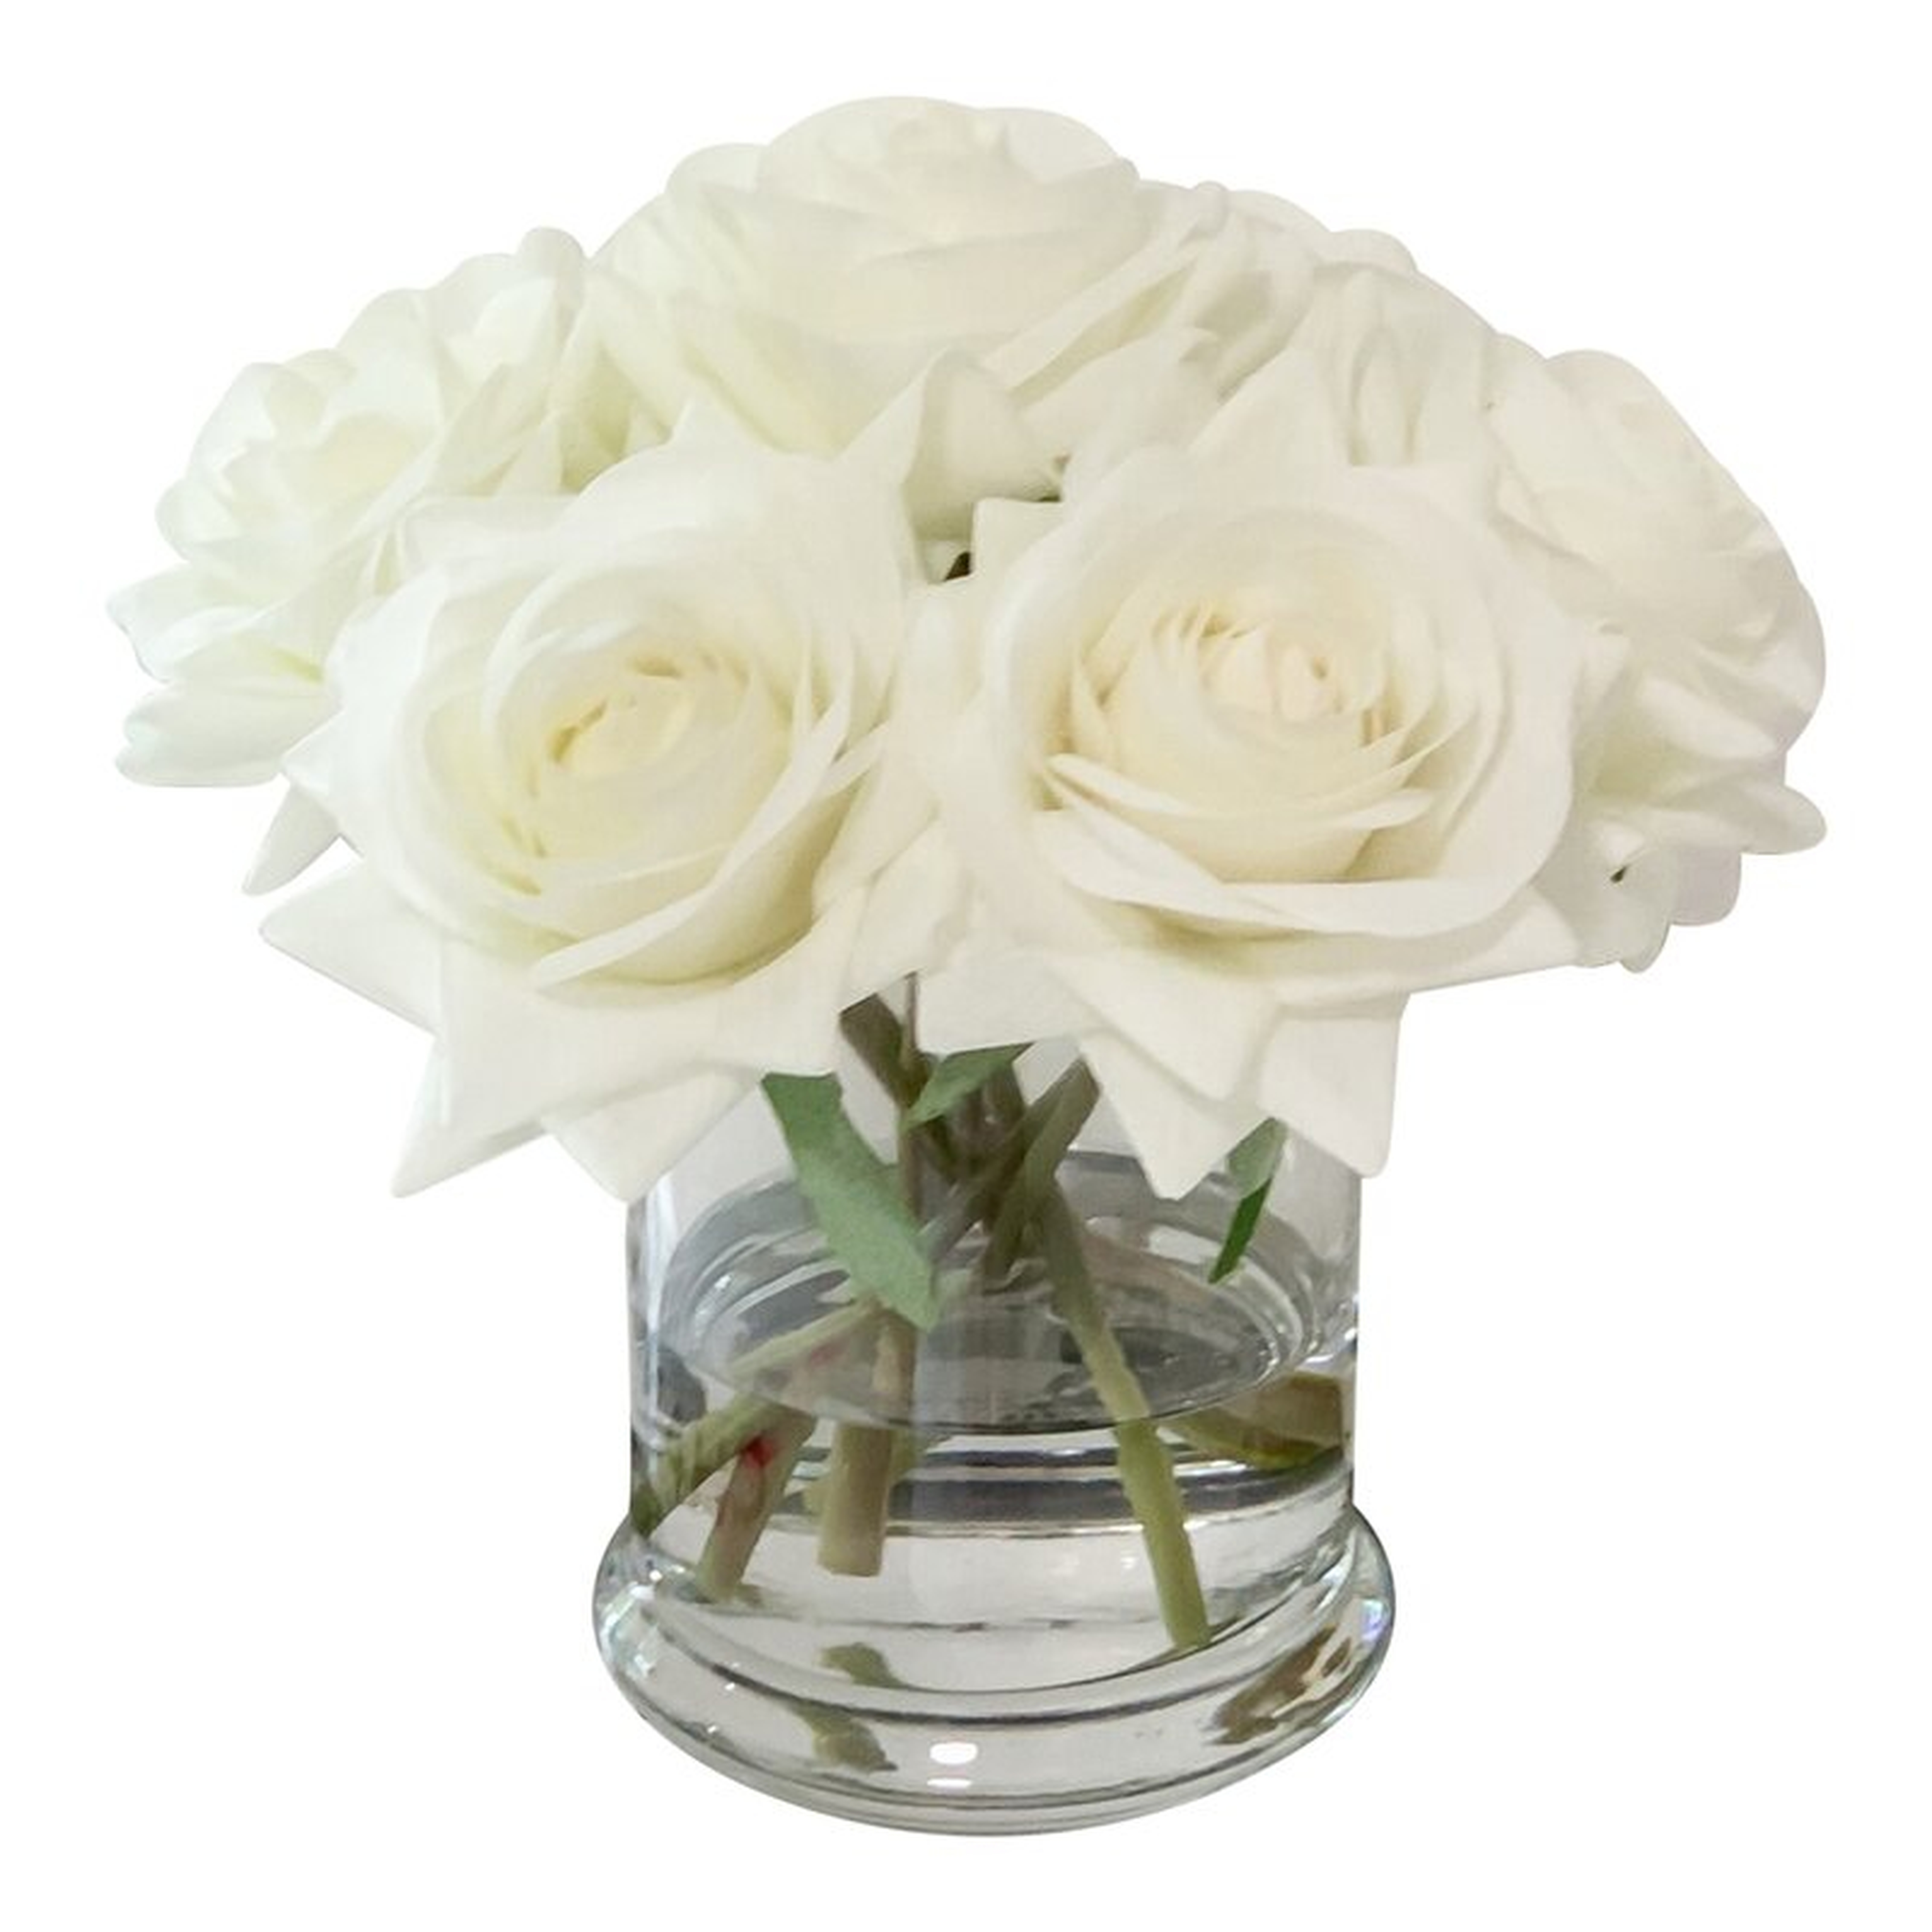 Real Touch Roses Floral Arrangements in Glass Vase - Wayfair